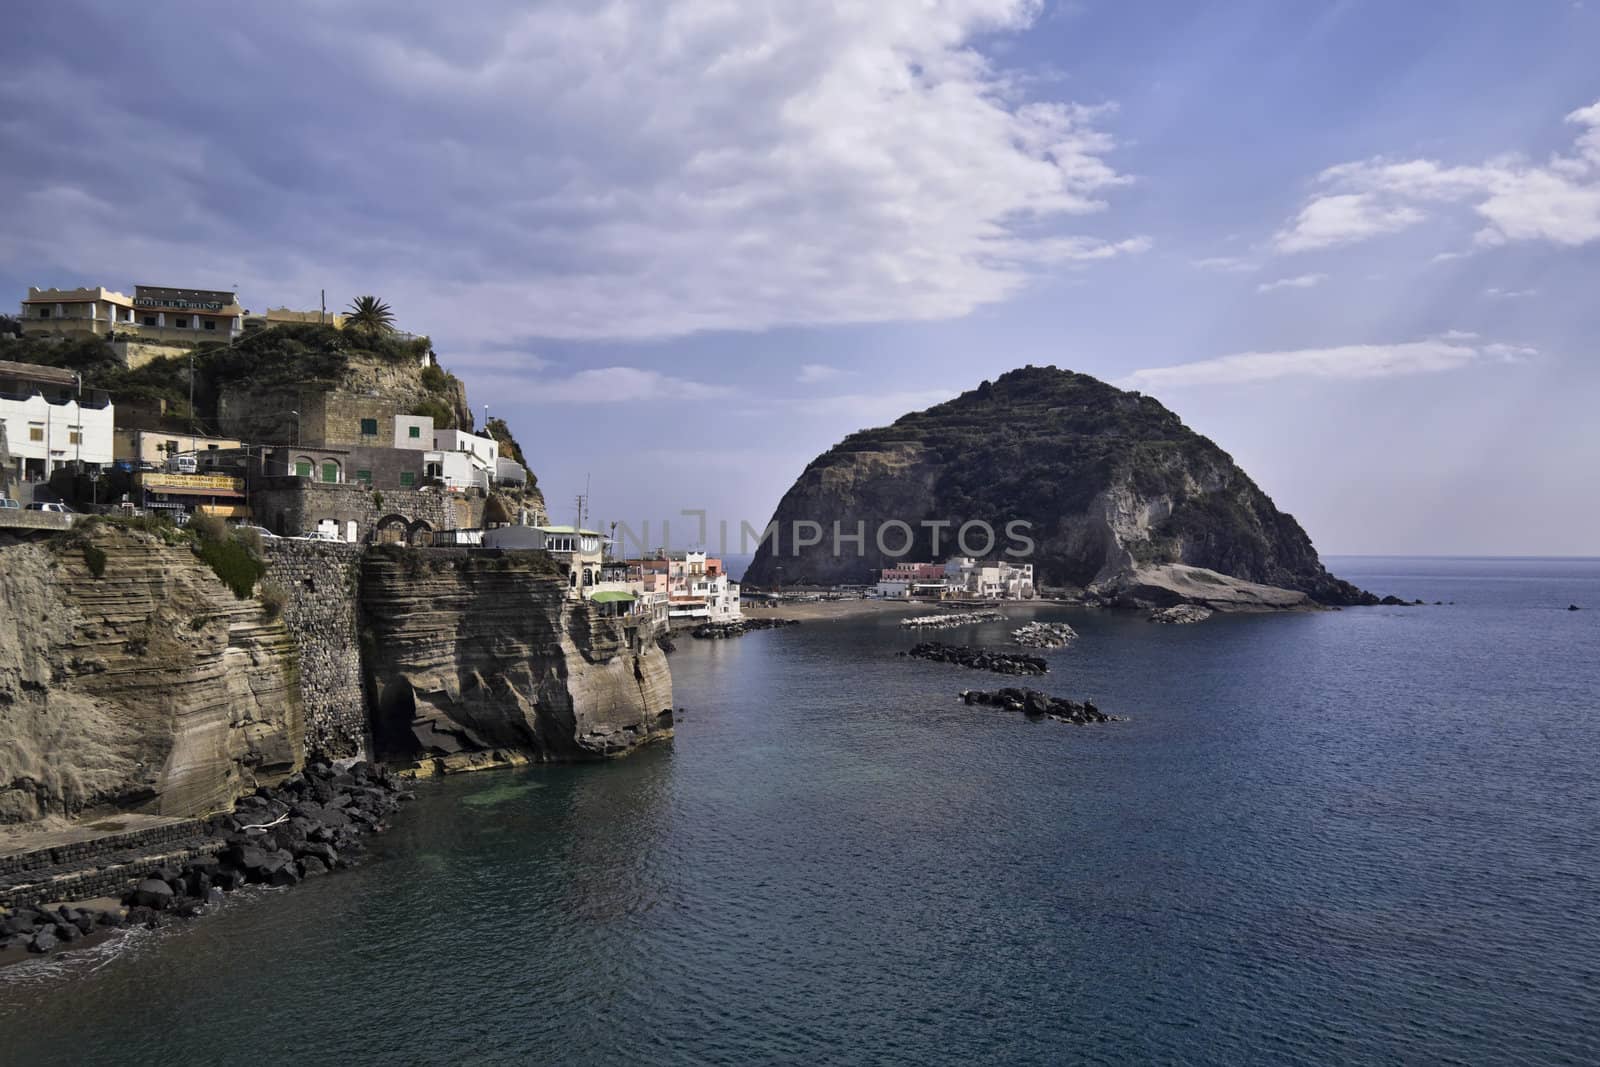 ITALY, Campania, Ischia island, S.Angelo, view of S.Angelo promontory by agiampiccolo